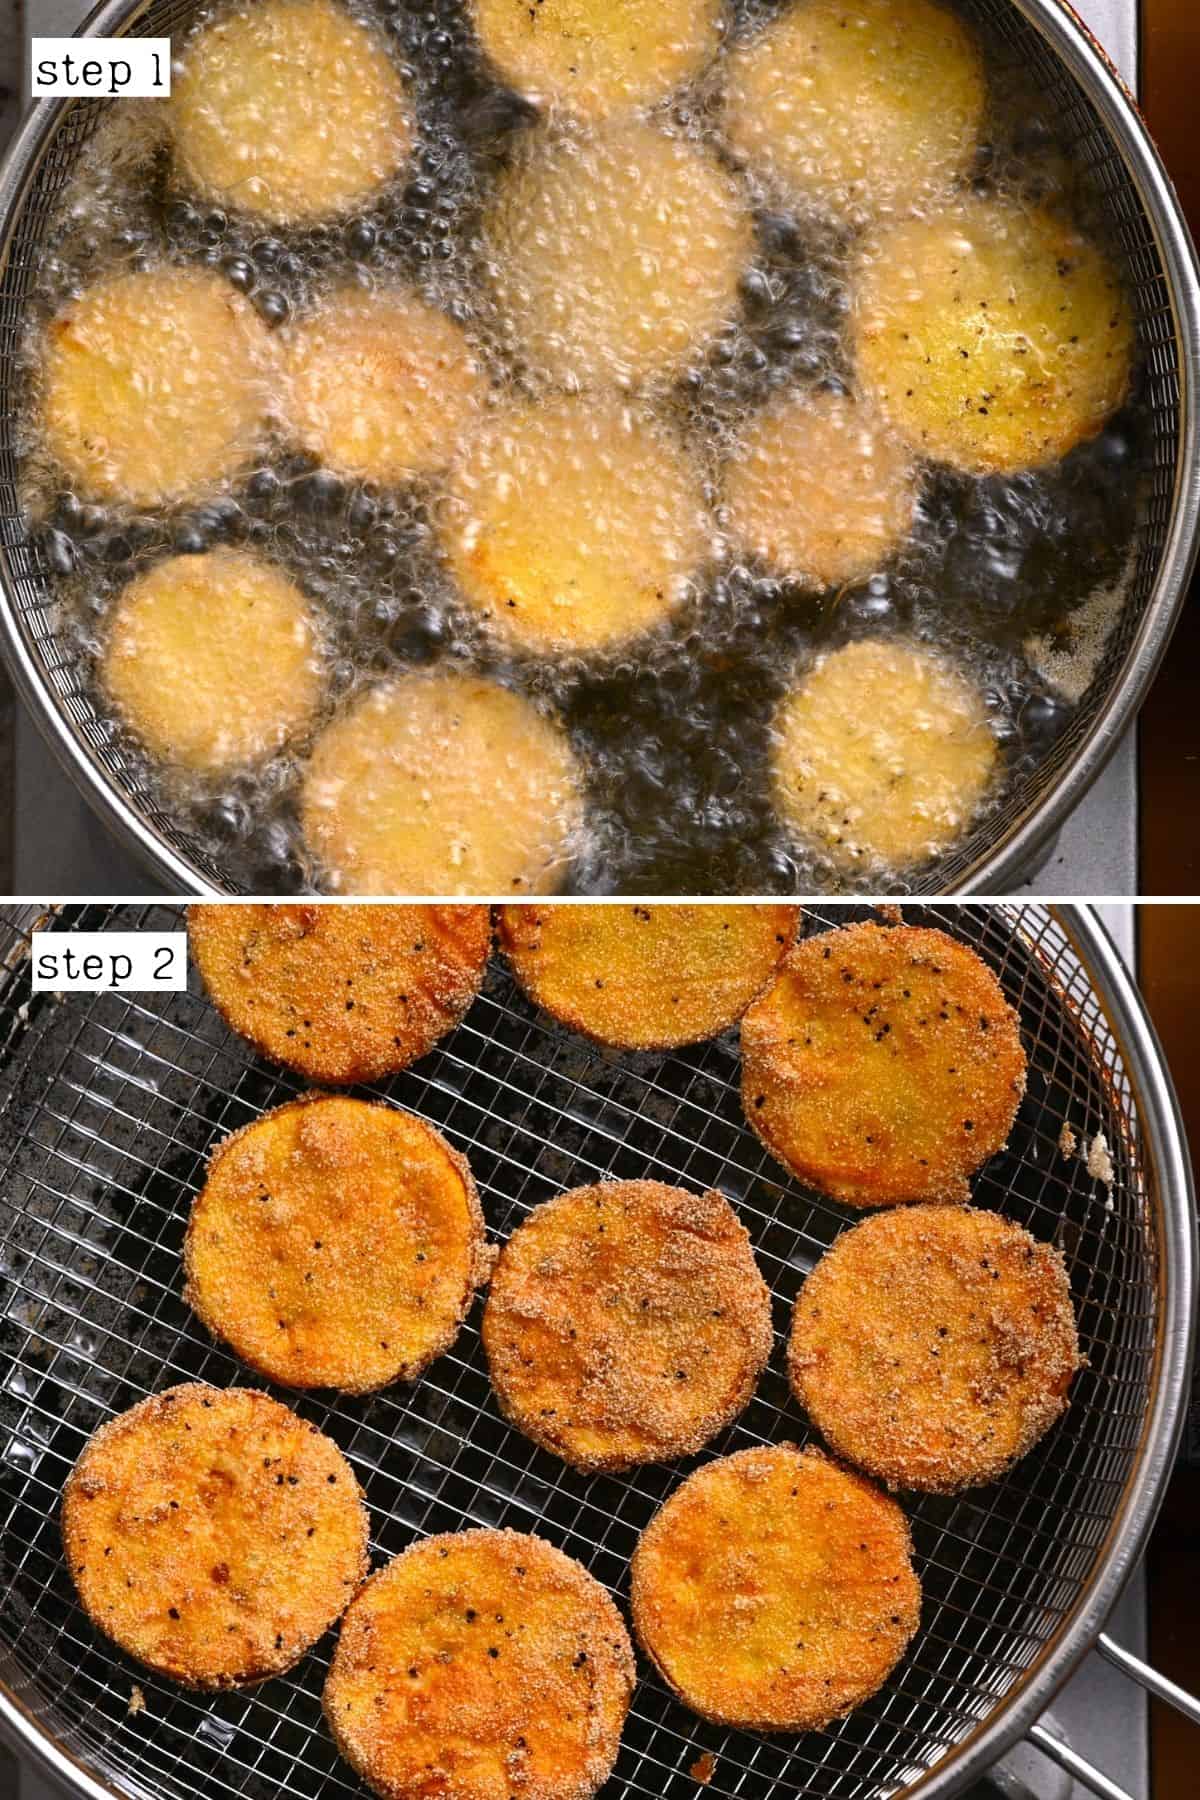 Steps for frying yellow squash